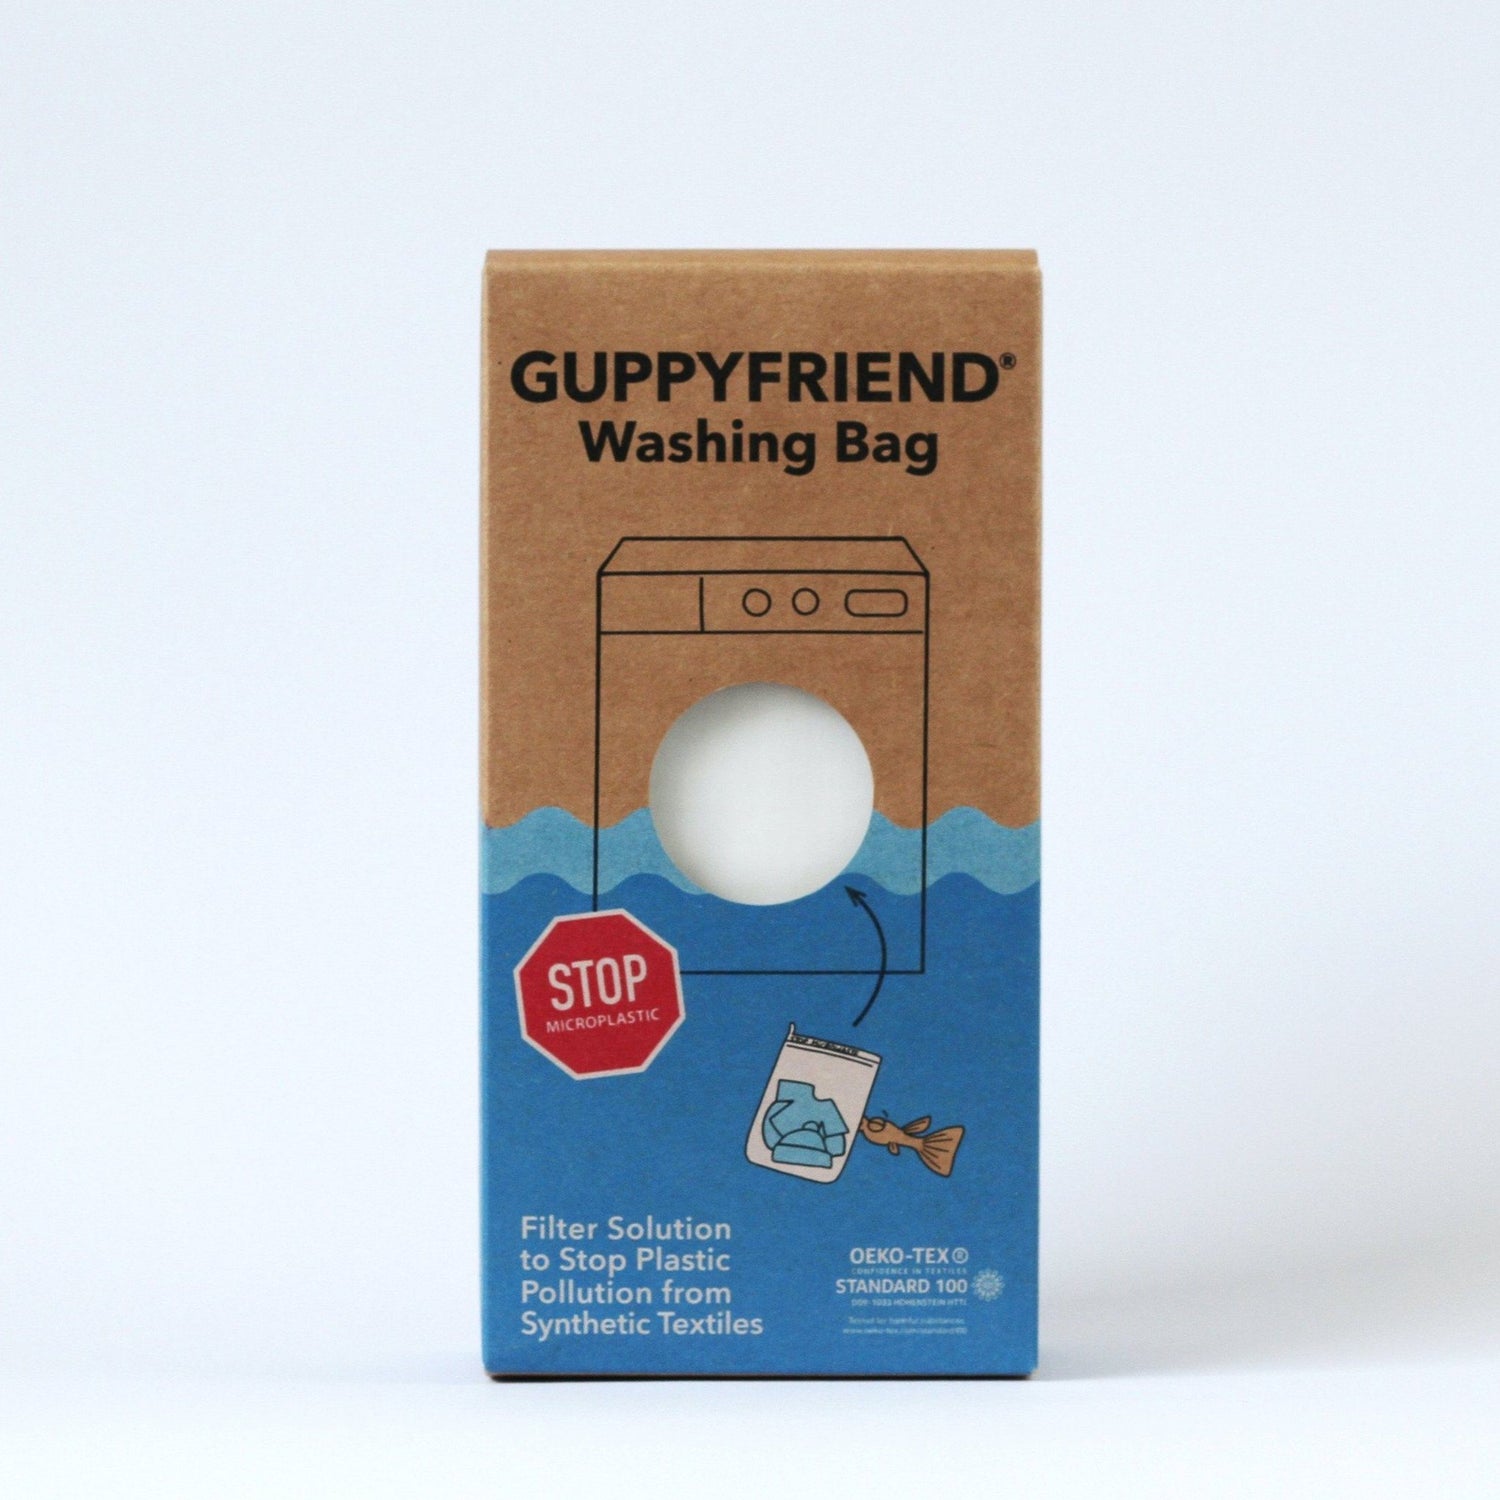 Guppyfriend Guppyfriend Washing Bag - Catch the microplastics during laundry Care products